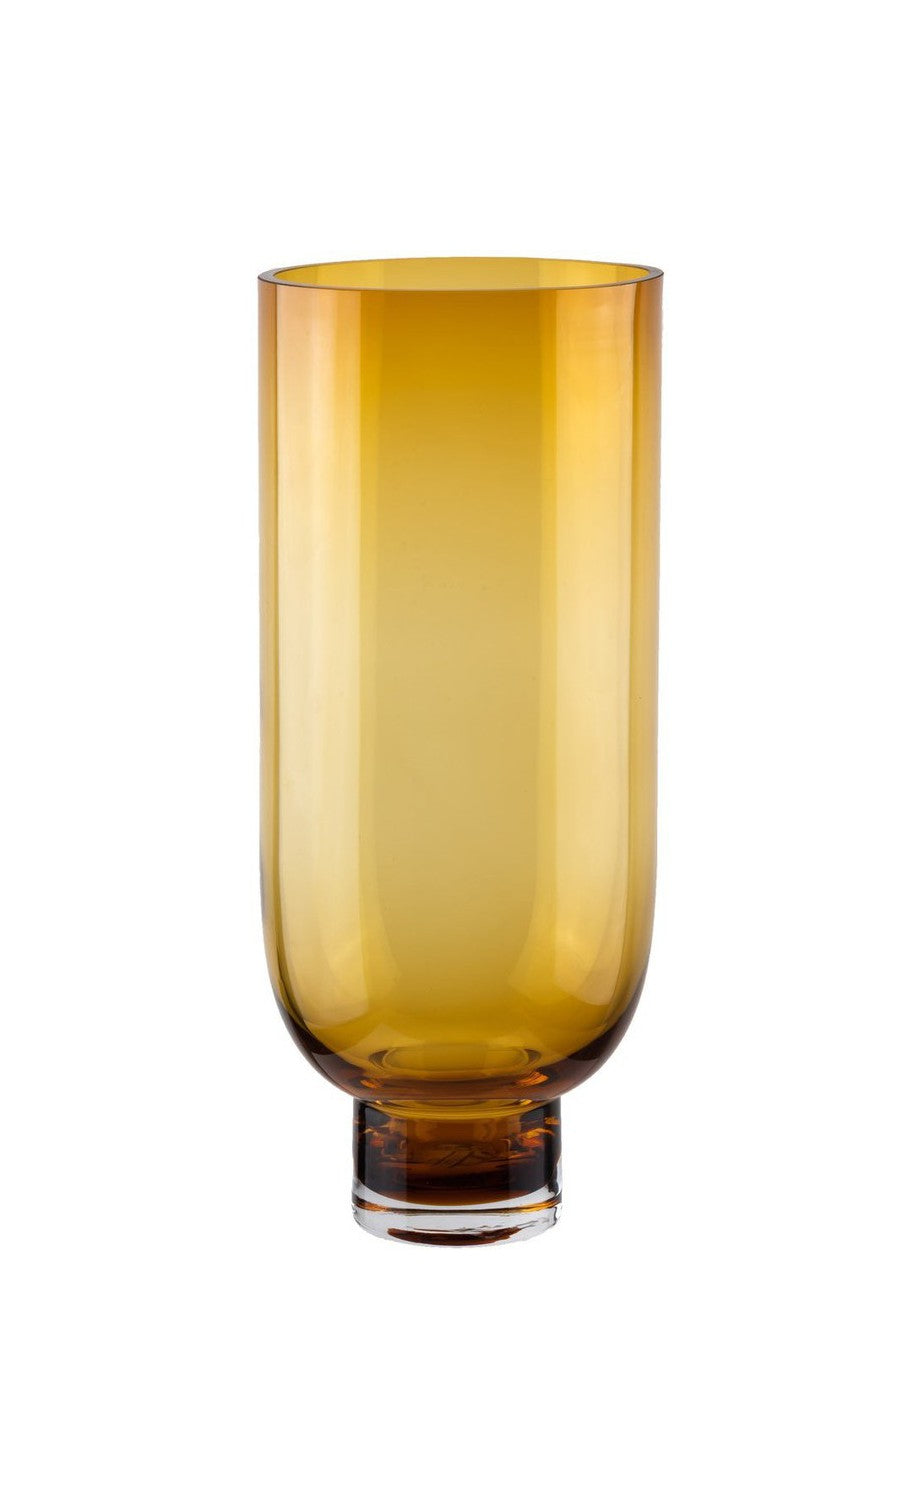 Sober modern tall glass vase, cylindrical shape on a solid base, warm